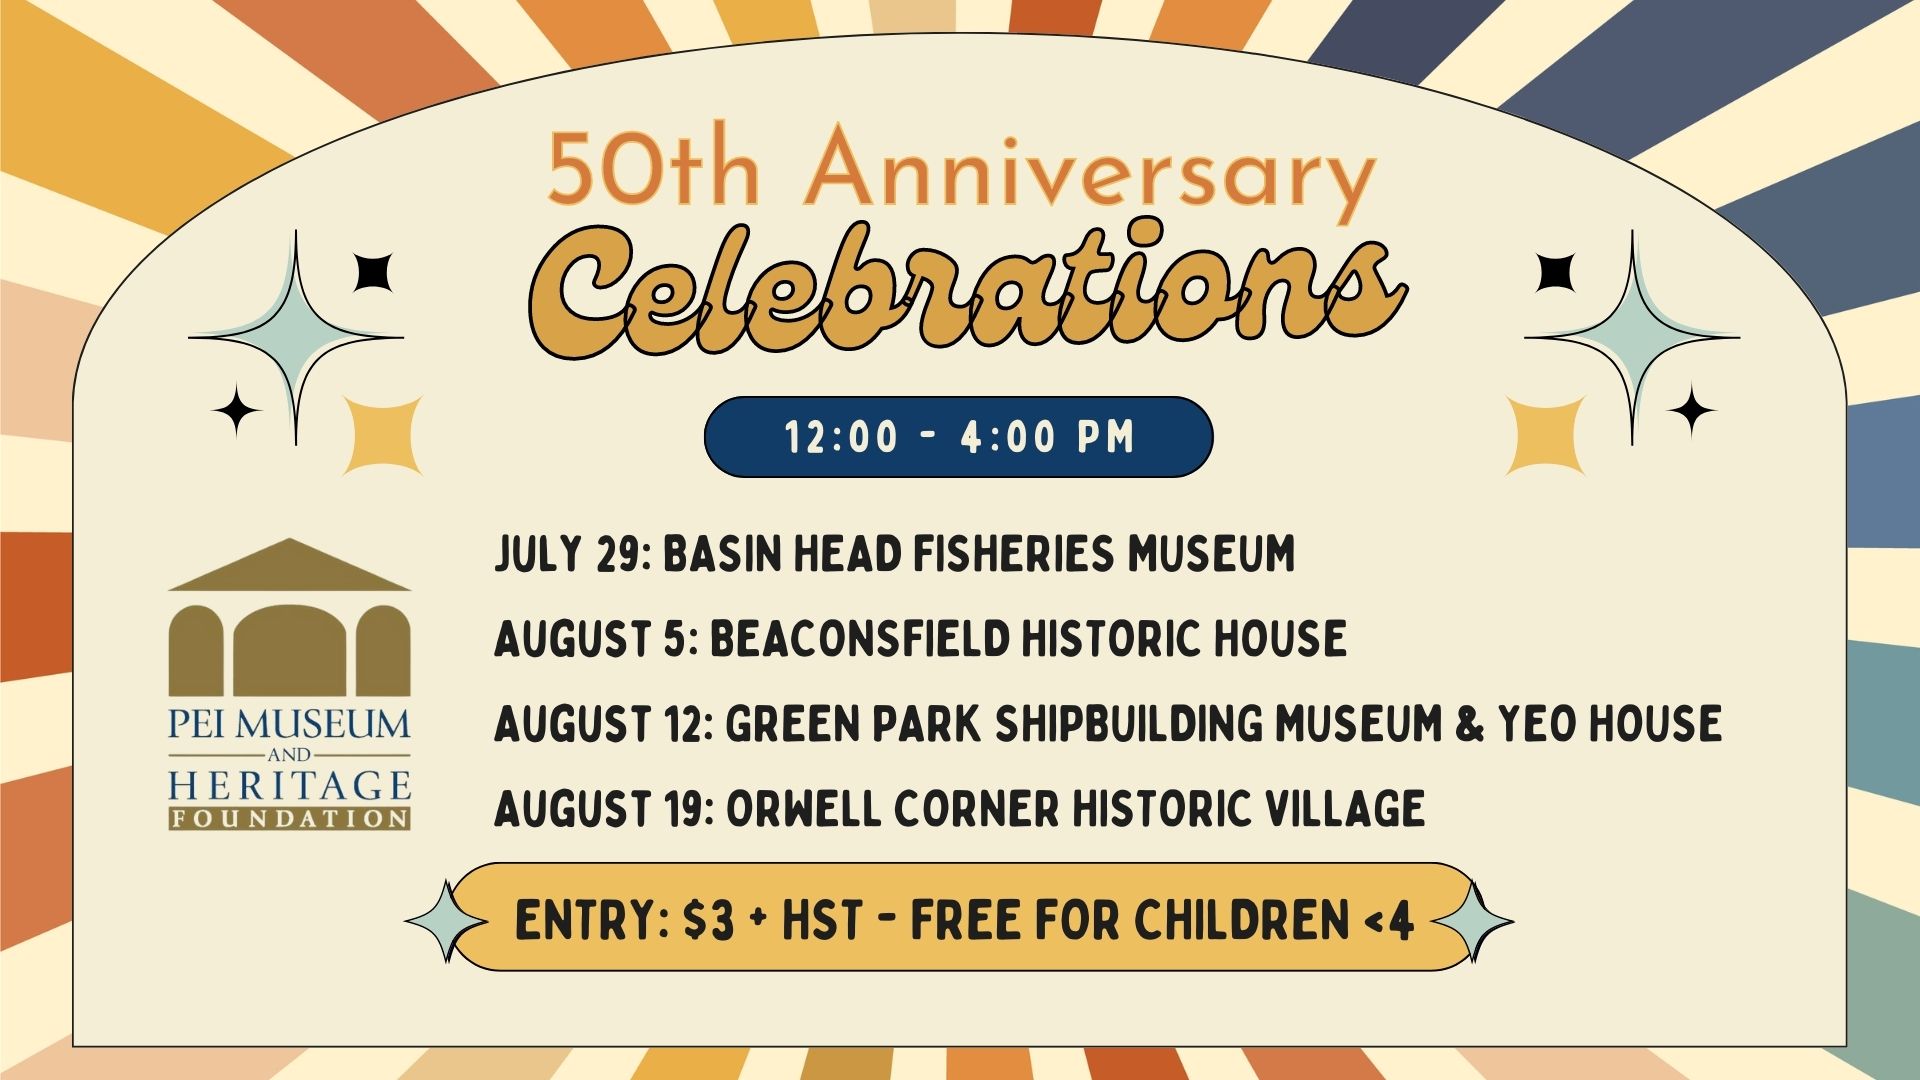 Colorful poster of 50th anniversary events of 4 museum and heritage sites: Basin Head Fisheries Museum, Beaconsfield Historic House, Green Park Shipbuilding Museum and Orwell Corner Historic Village 